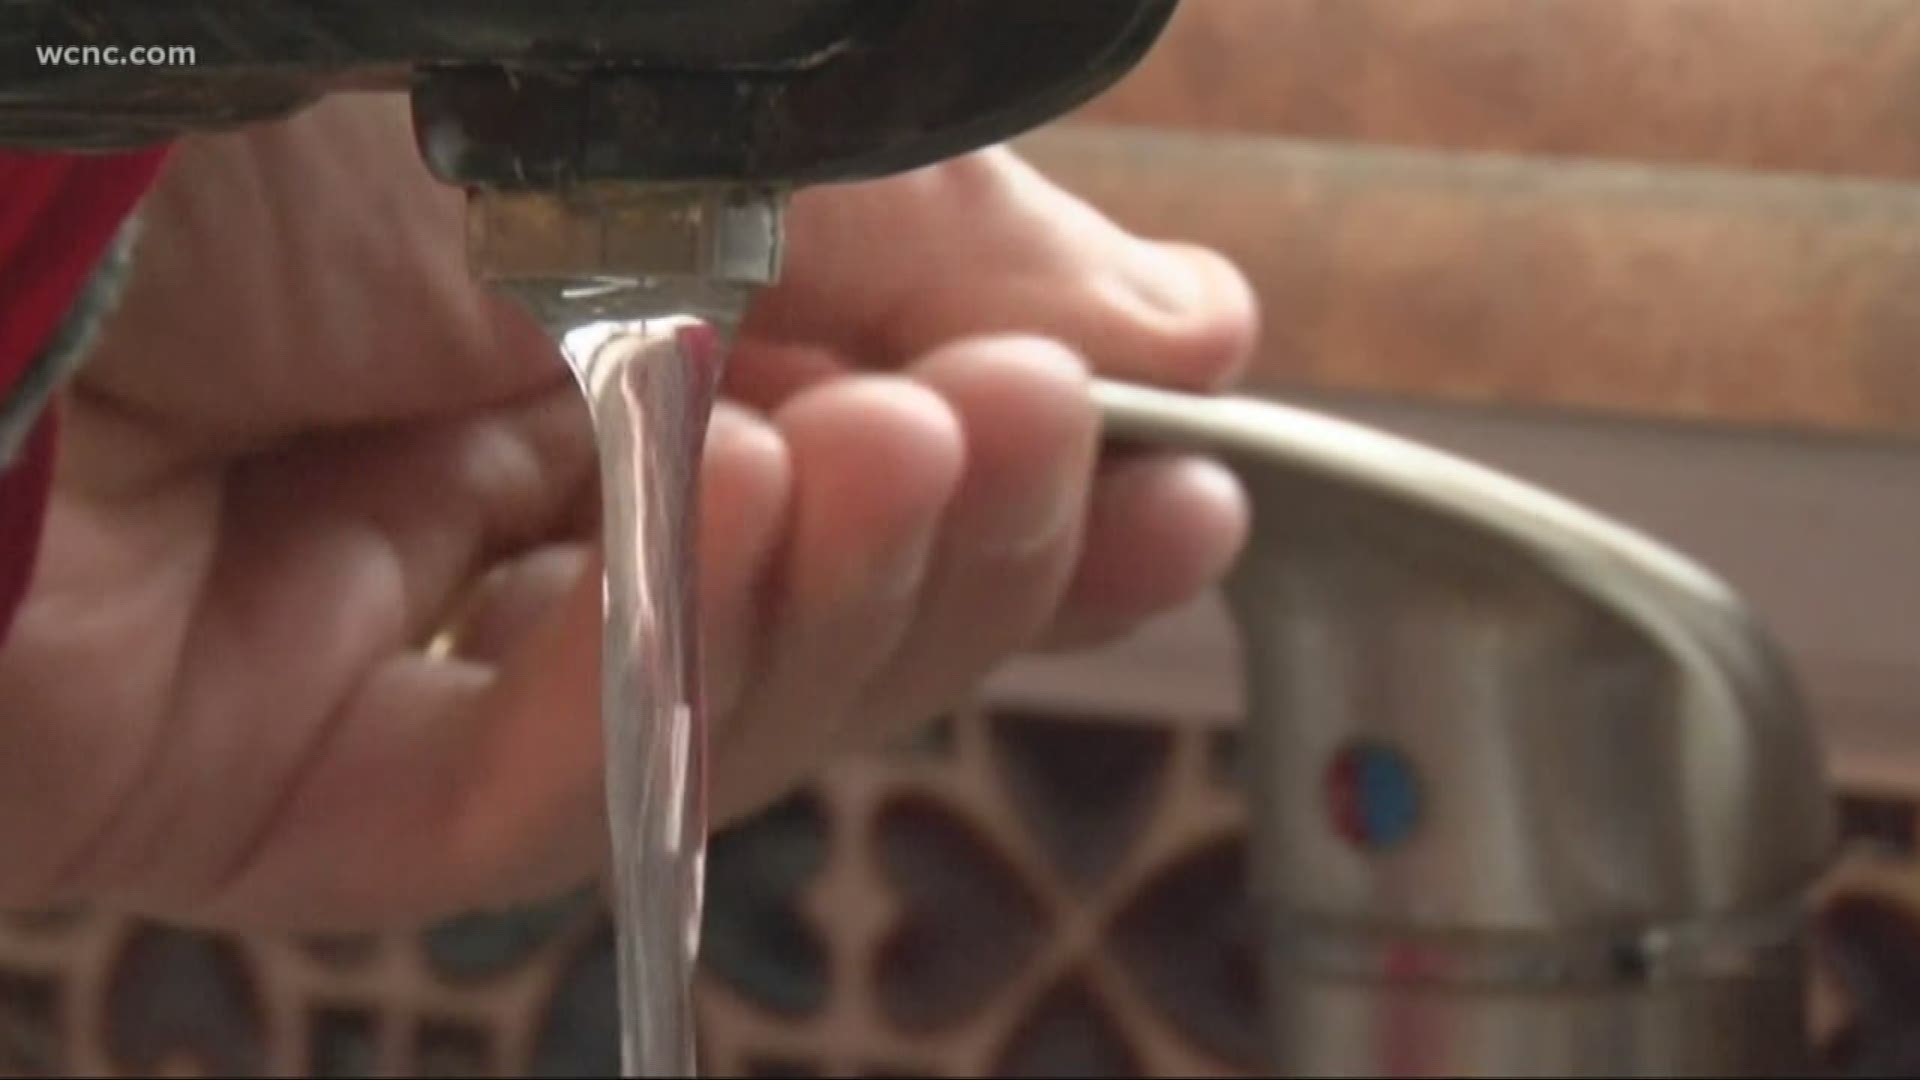 Customers with Union County Public Works are under a boil water advisory after E. Coli was found in the drinking water supply.